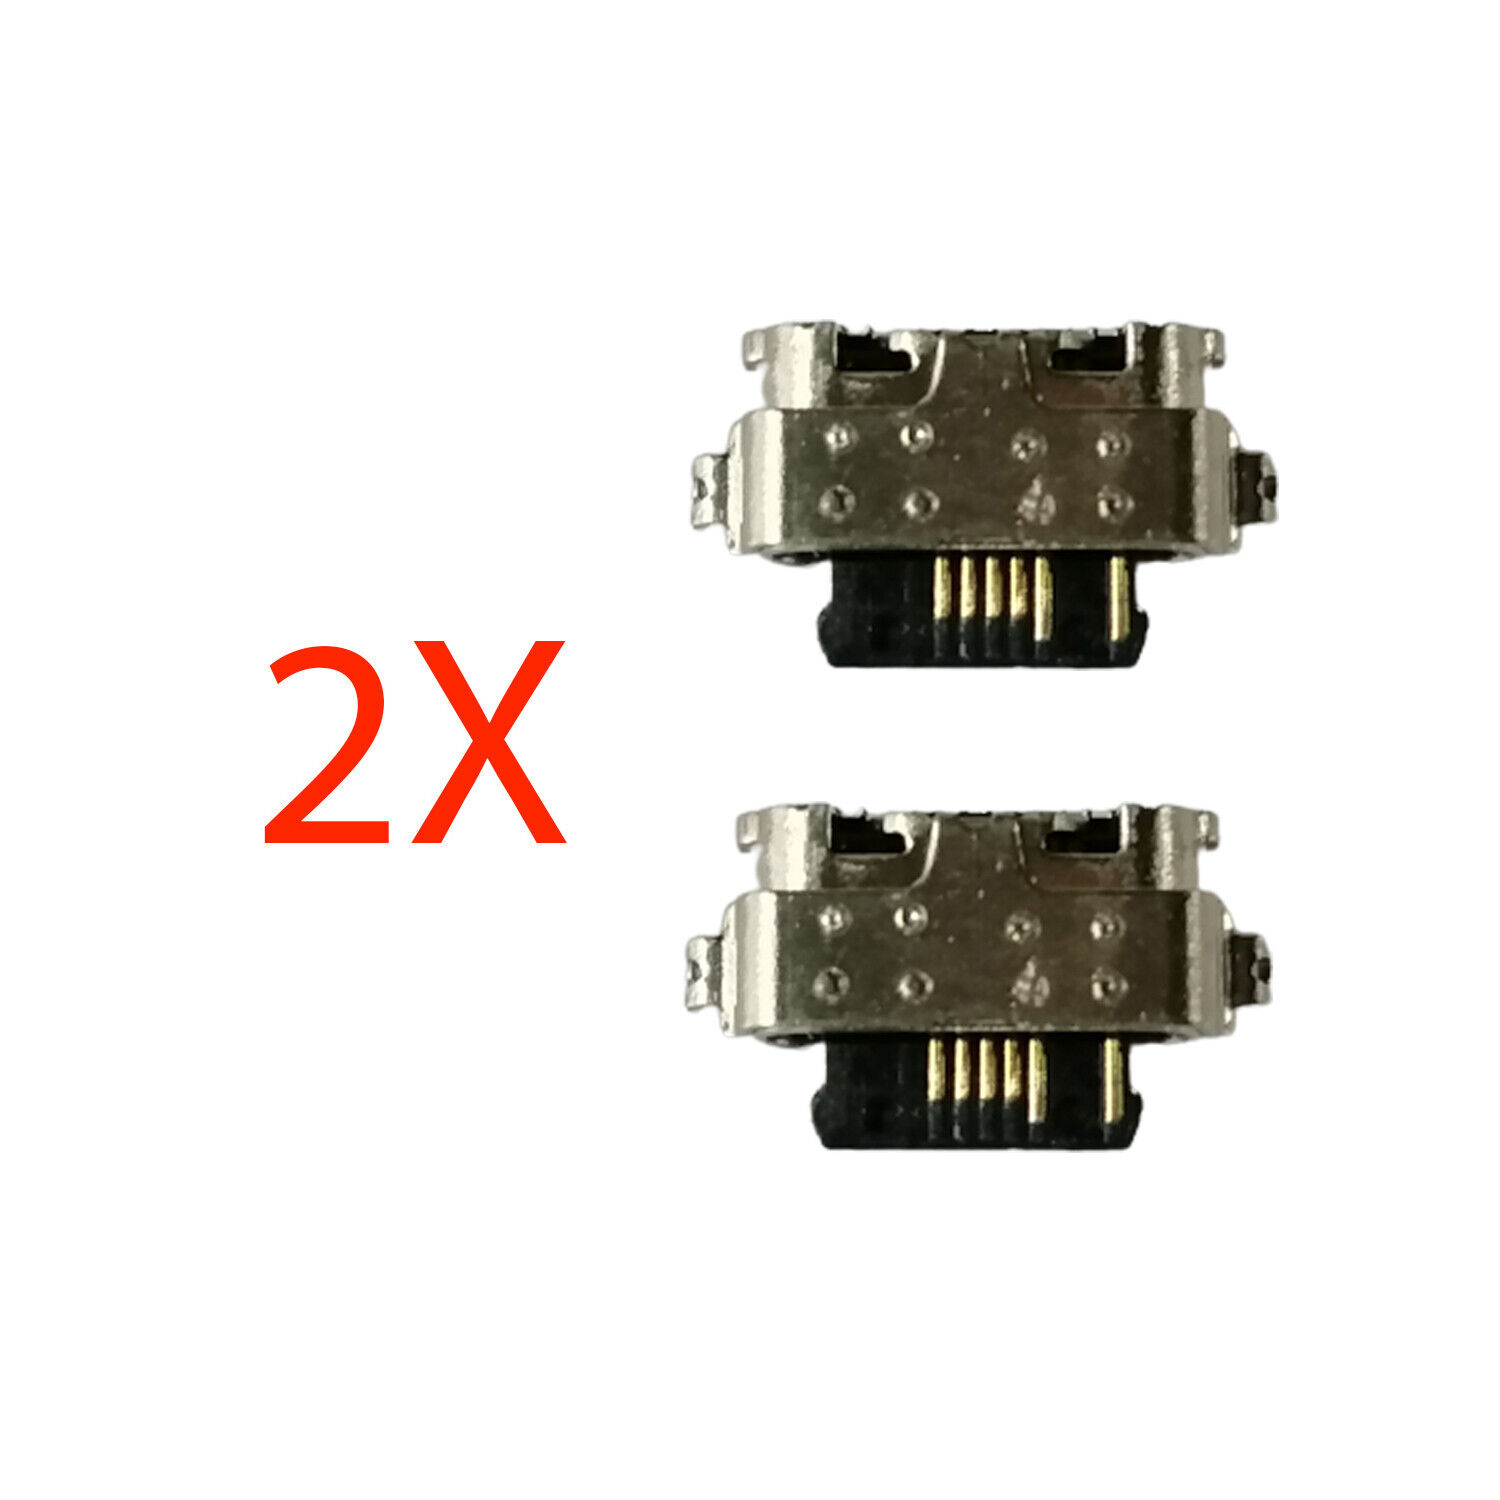 2X USB Type C Charging Port Dock Connector for Alcatel Joy Tab 2 9032 9032Z Unbranded Does not apply